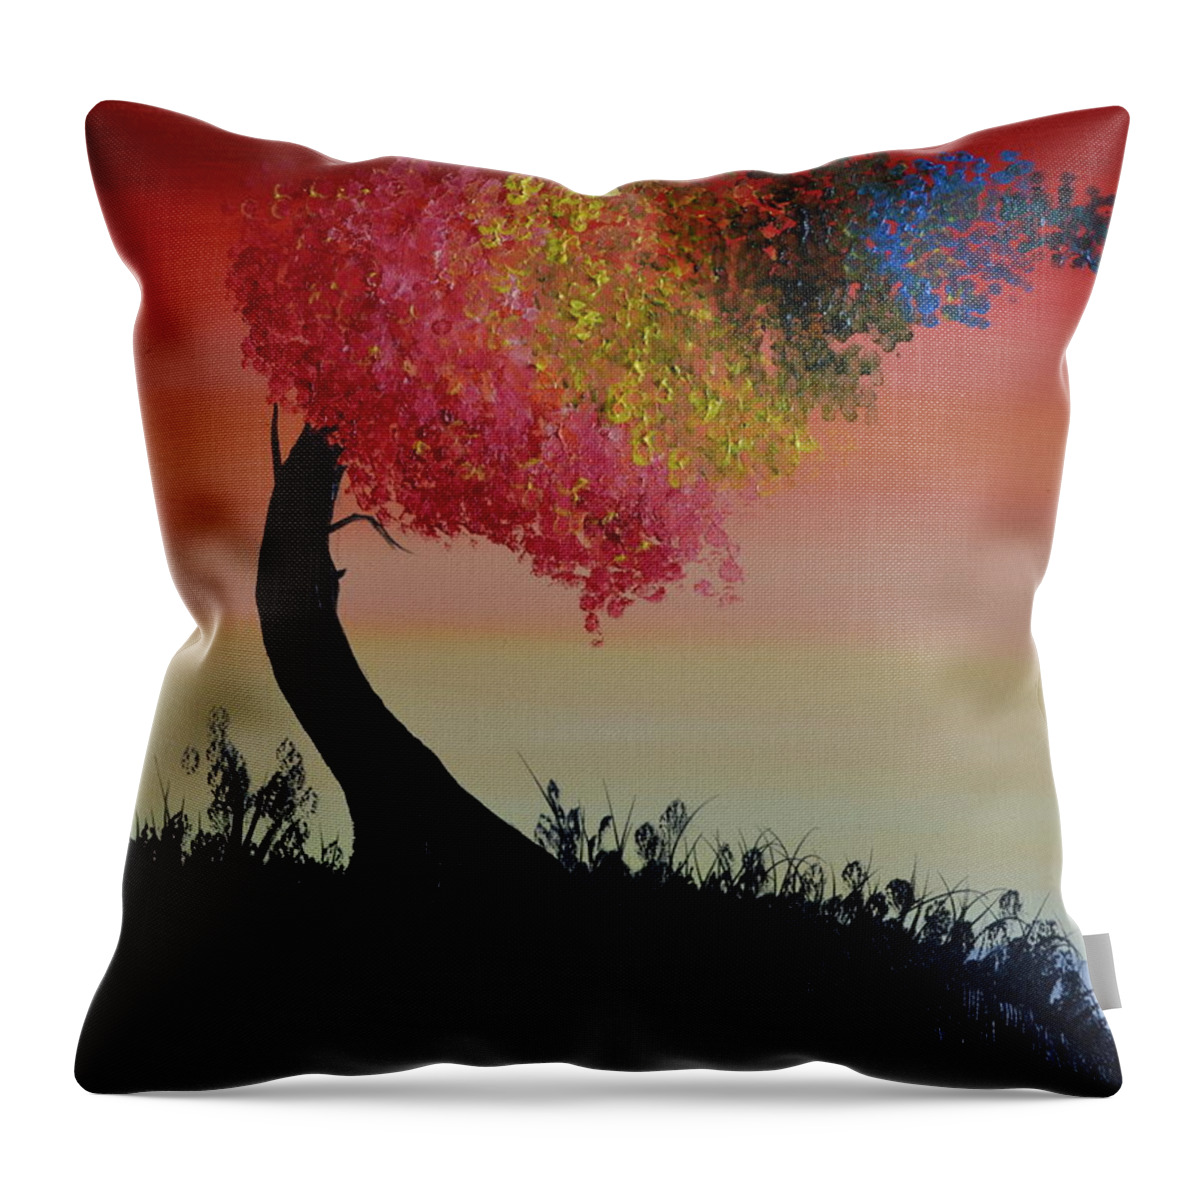 An Abstract Oil Painting Of A Tree Bending In The Wind. The Leaves Are Different Colors To Represent A Rainbow. Throw Pillow featuring the painting Rainbow Tree by Martin Schmidt